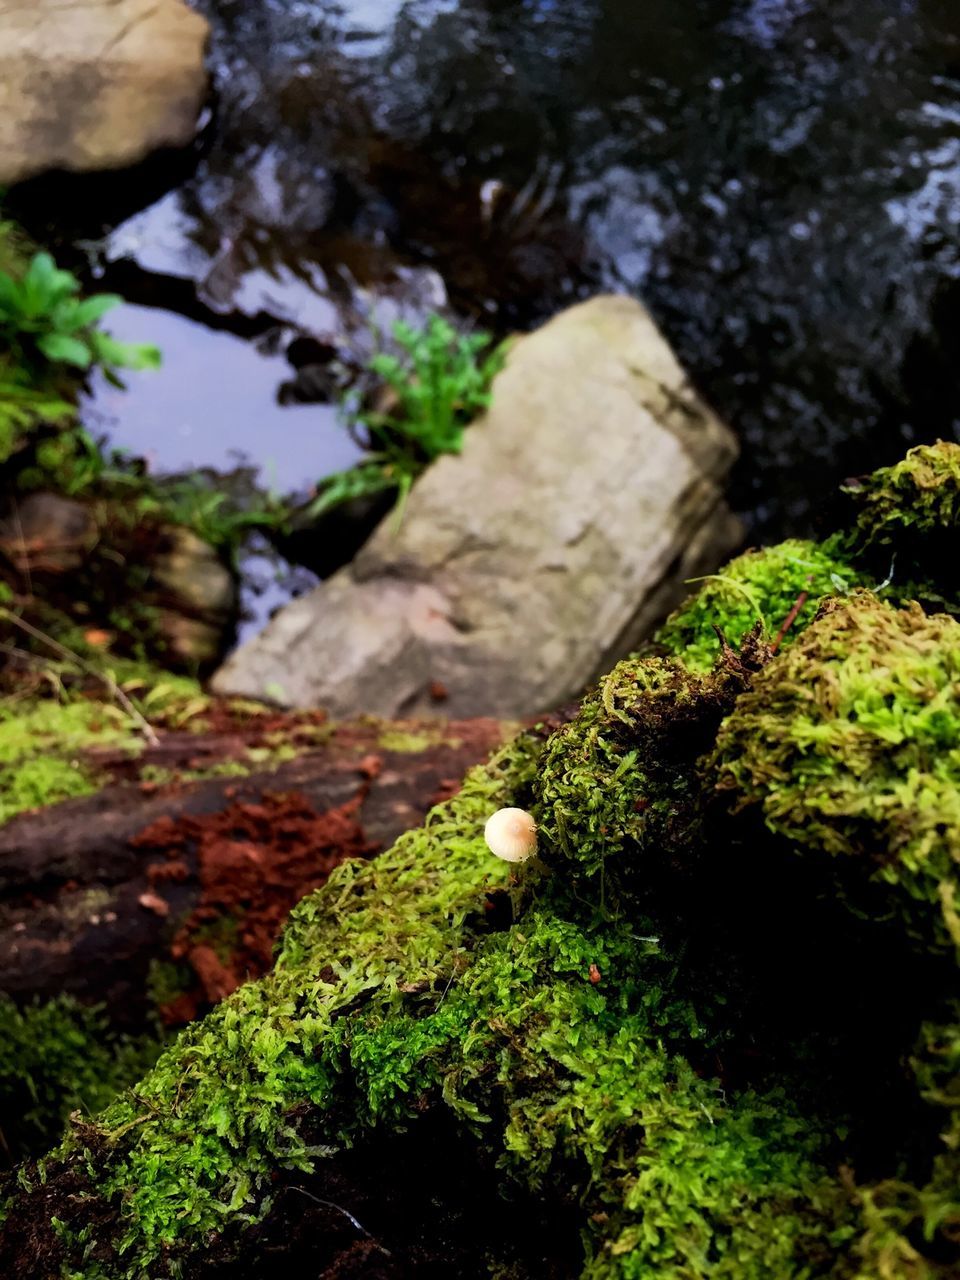 rock - object, moss, nature, rock, rock formation, water, growth, beauty in nature, plant, green color, tranquility, close-up, stream, forest, rough, textured, focus on foreground, outdoors, day, high angle view